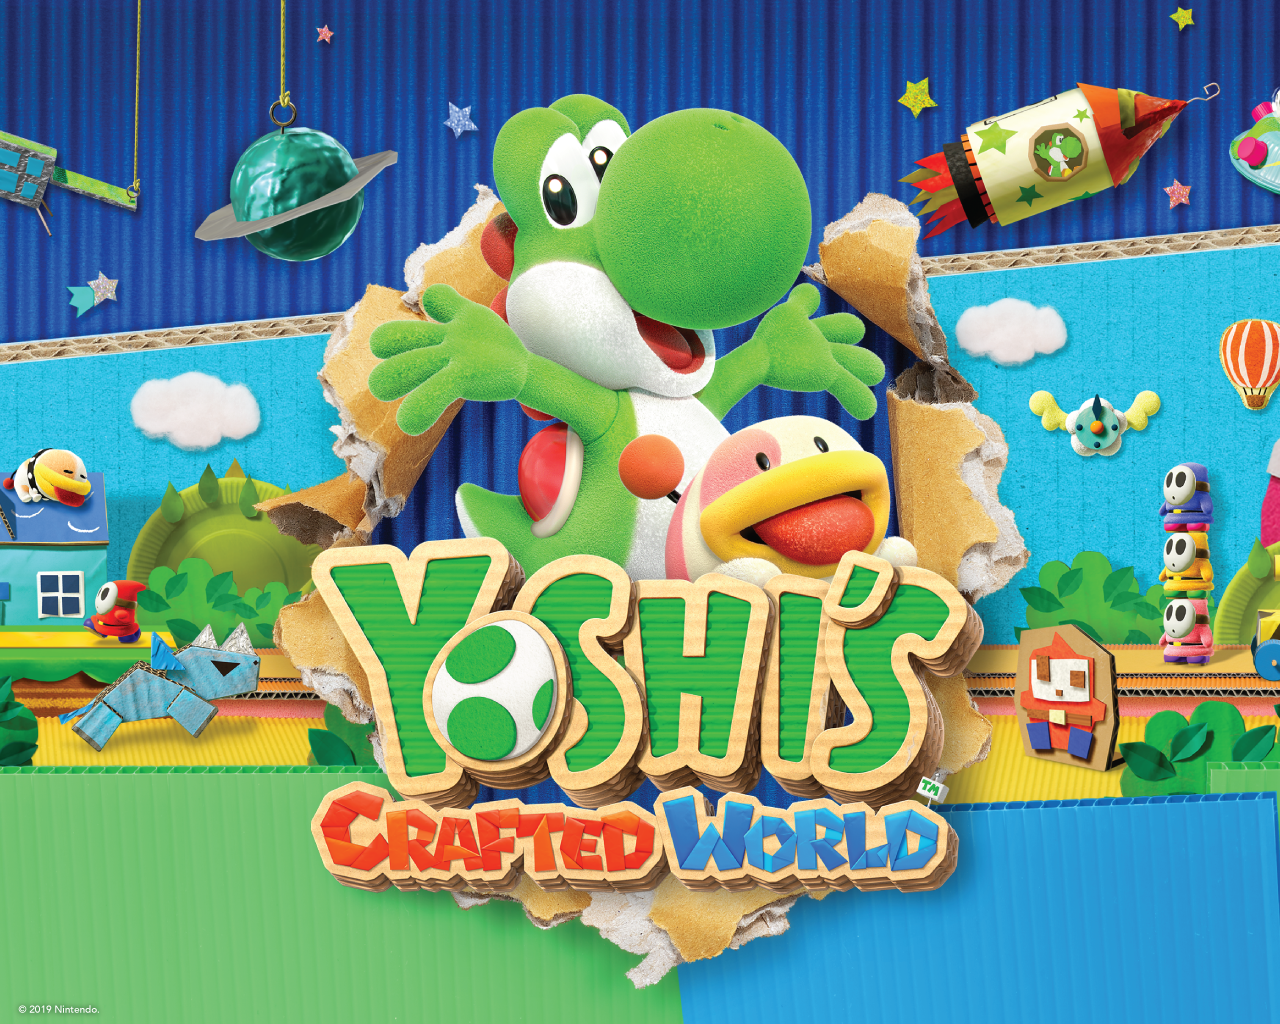 General 1280x1024 Nintendo Nintendo Switch Yoshi's Crafted World video game characters